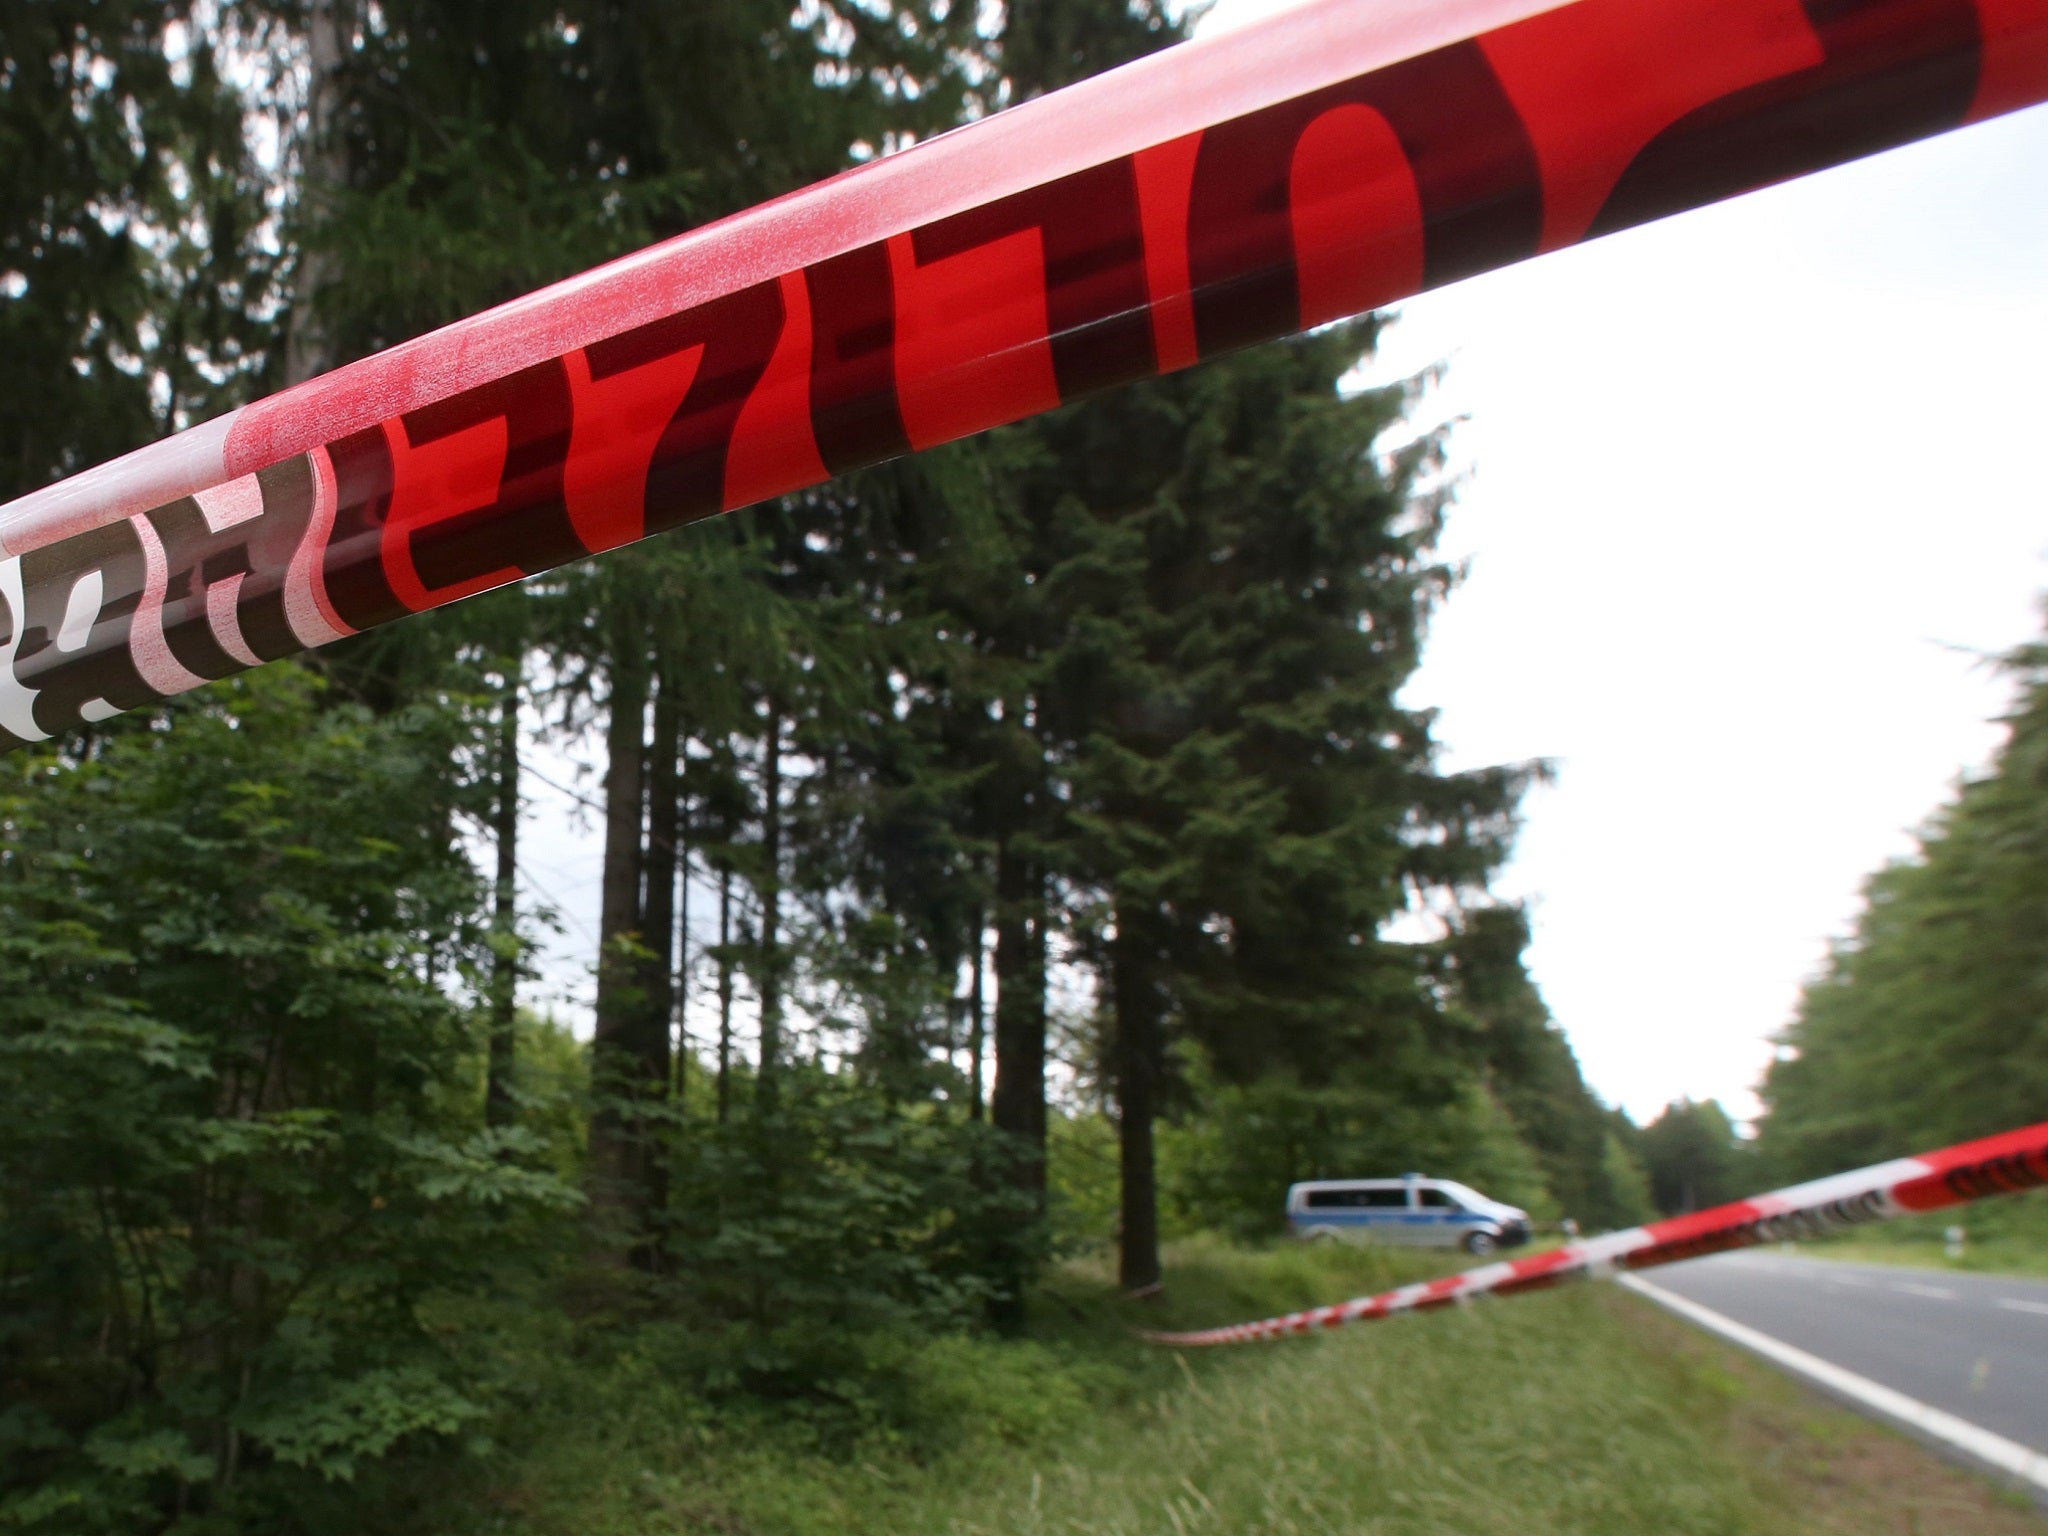 Picture taken on 6 July, 2016 shows a police cordon at a forest near Rodacherbrunn, eastern Germany, where remains of alleged murder victim Peggy Knobloch were found.